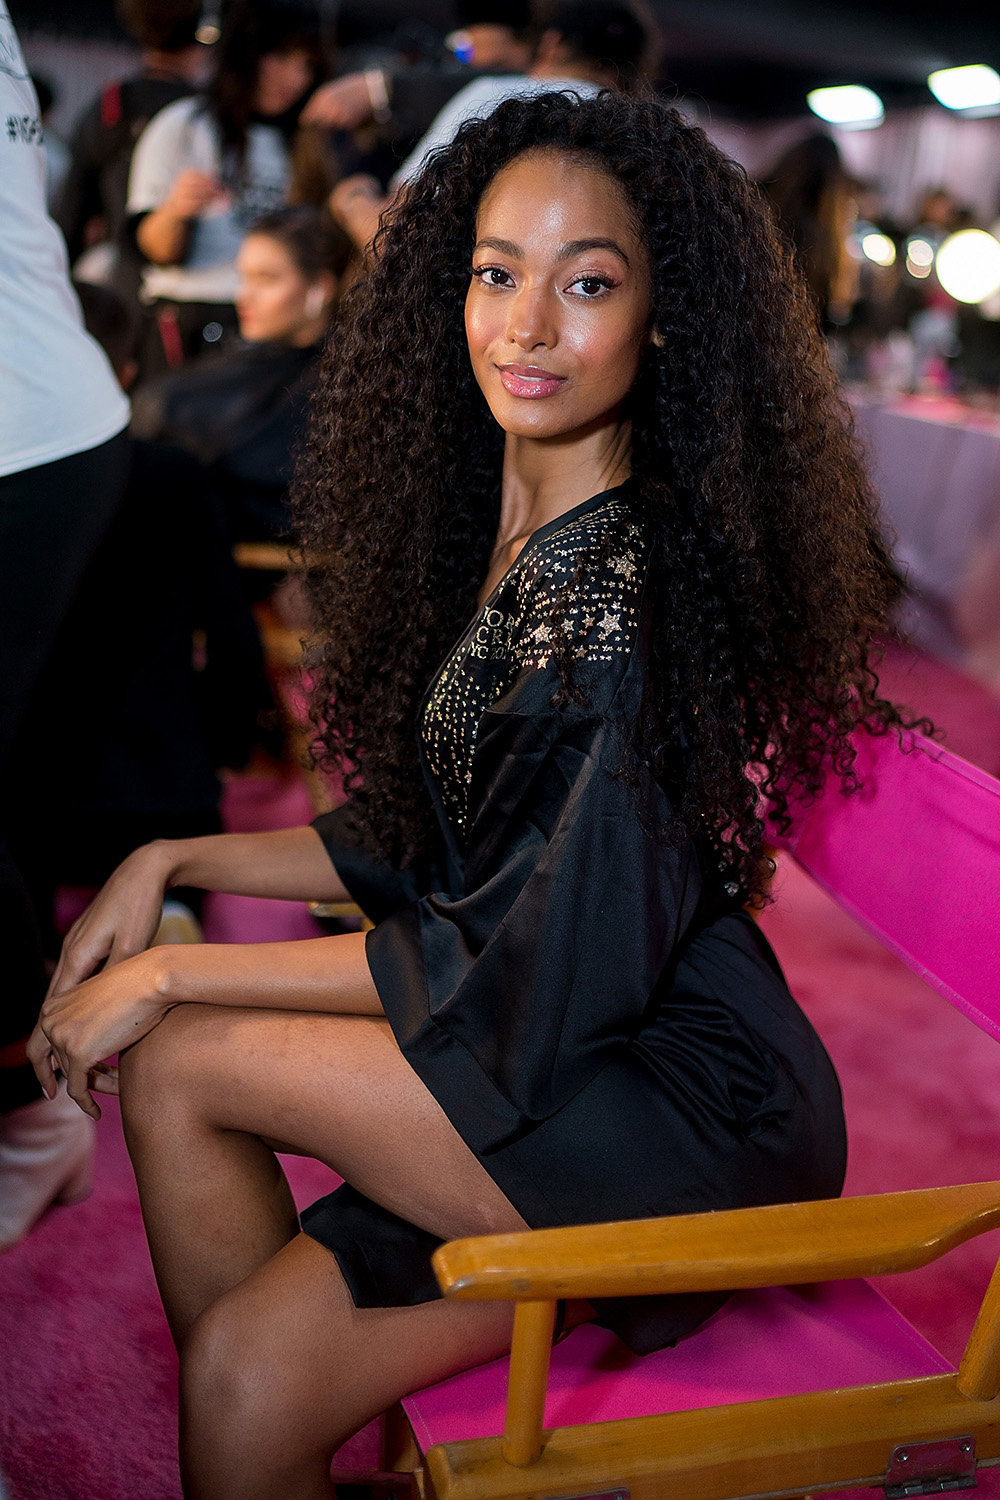 NEW YORK, NY - NOVEMBER 08: Melia Tiacoh poses before the 2018 Victoria's Secret Fashion Show at Pier 94 on November 8, 2018 in New York City. (Photo by Michael Stewart/FilmMagic,)